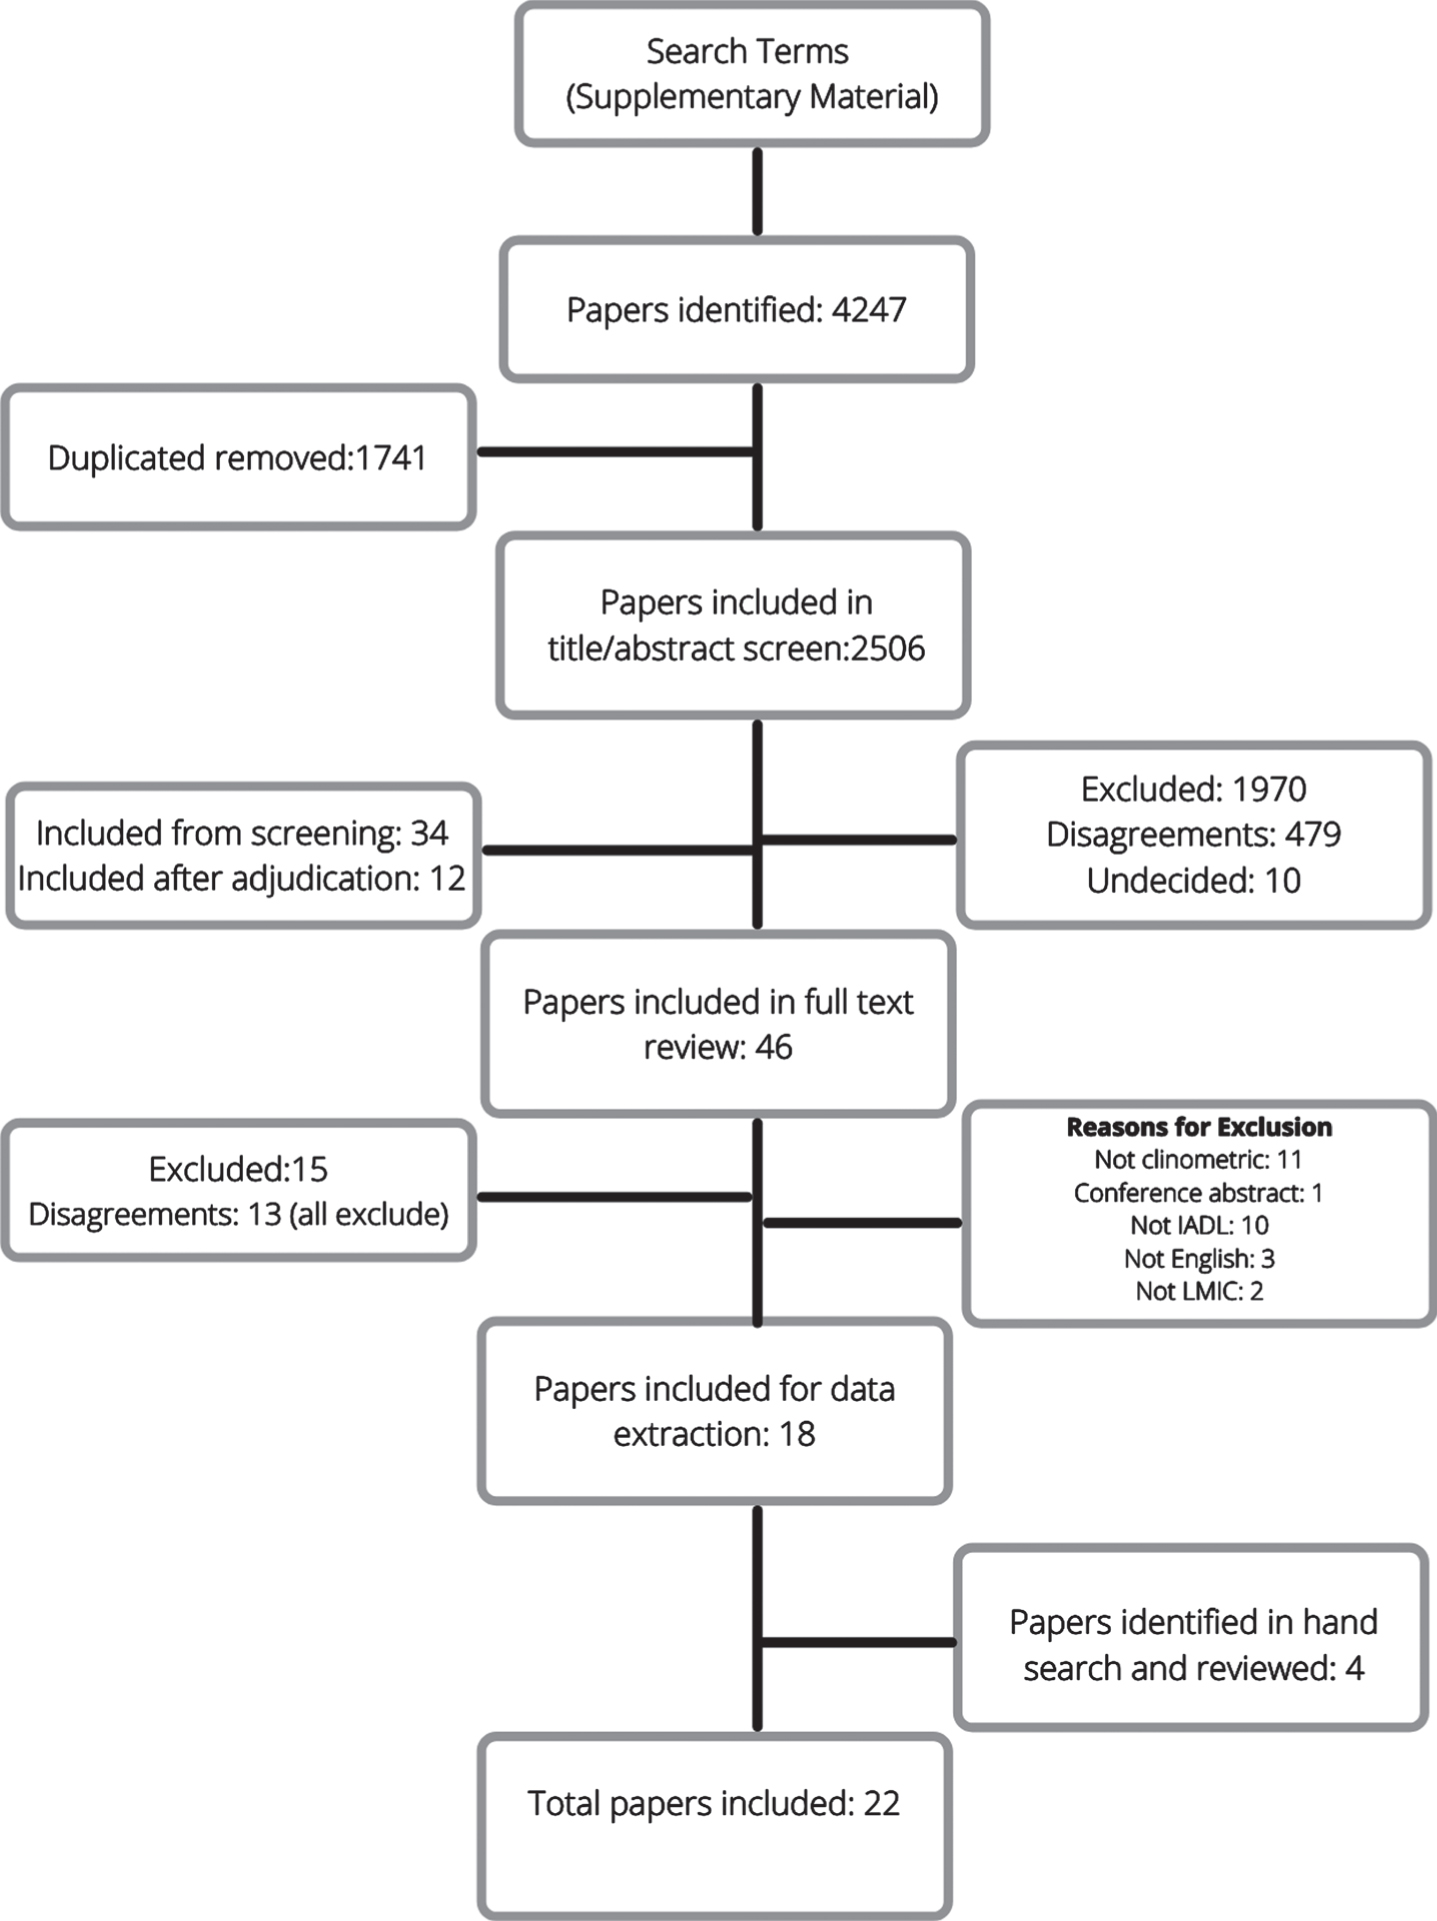 Flowchart of the screening and eligibility evaluation for studies included in the review.